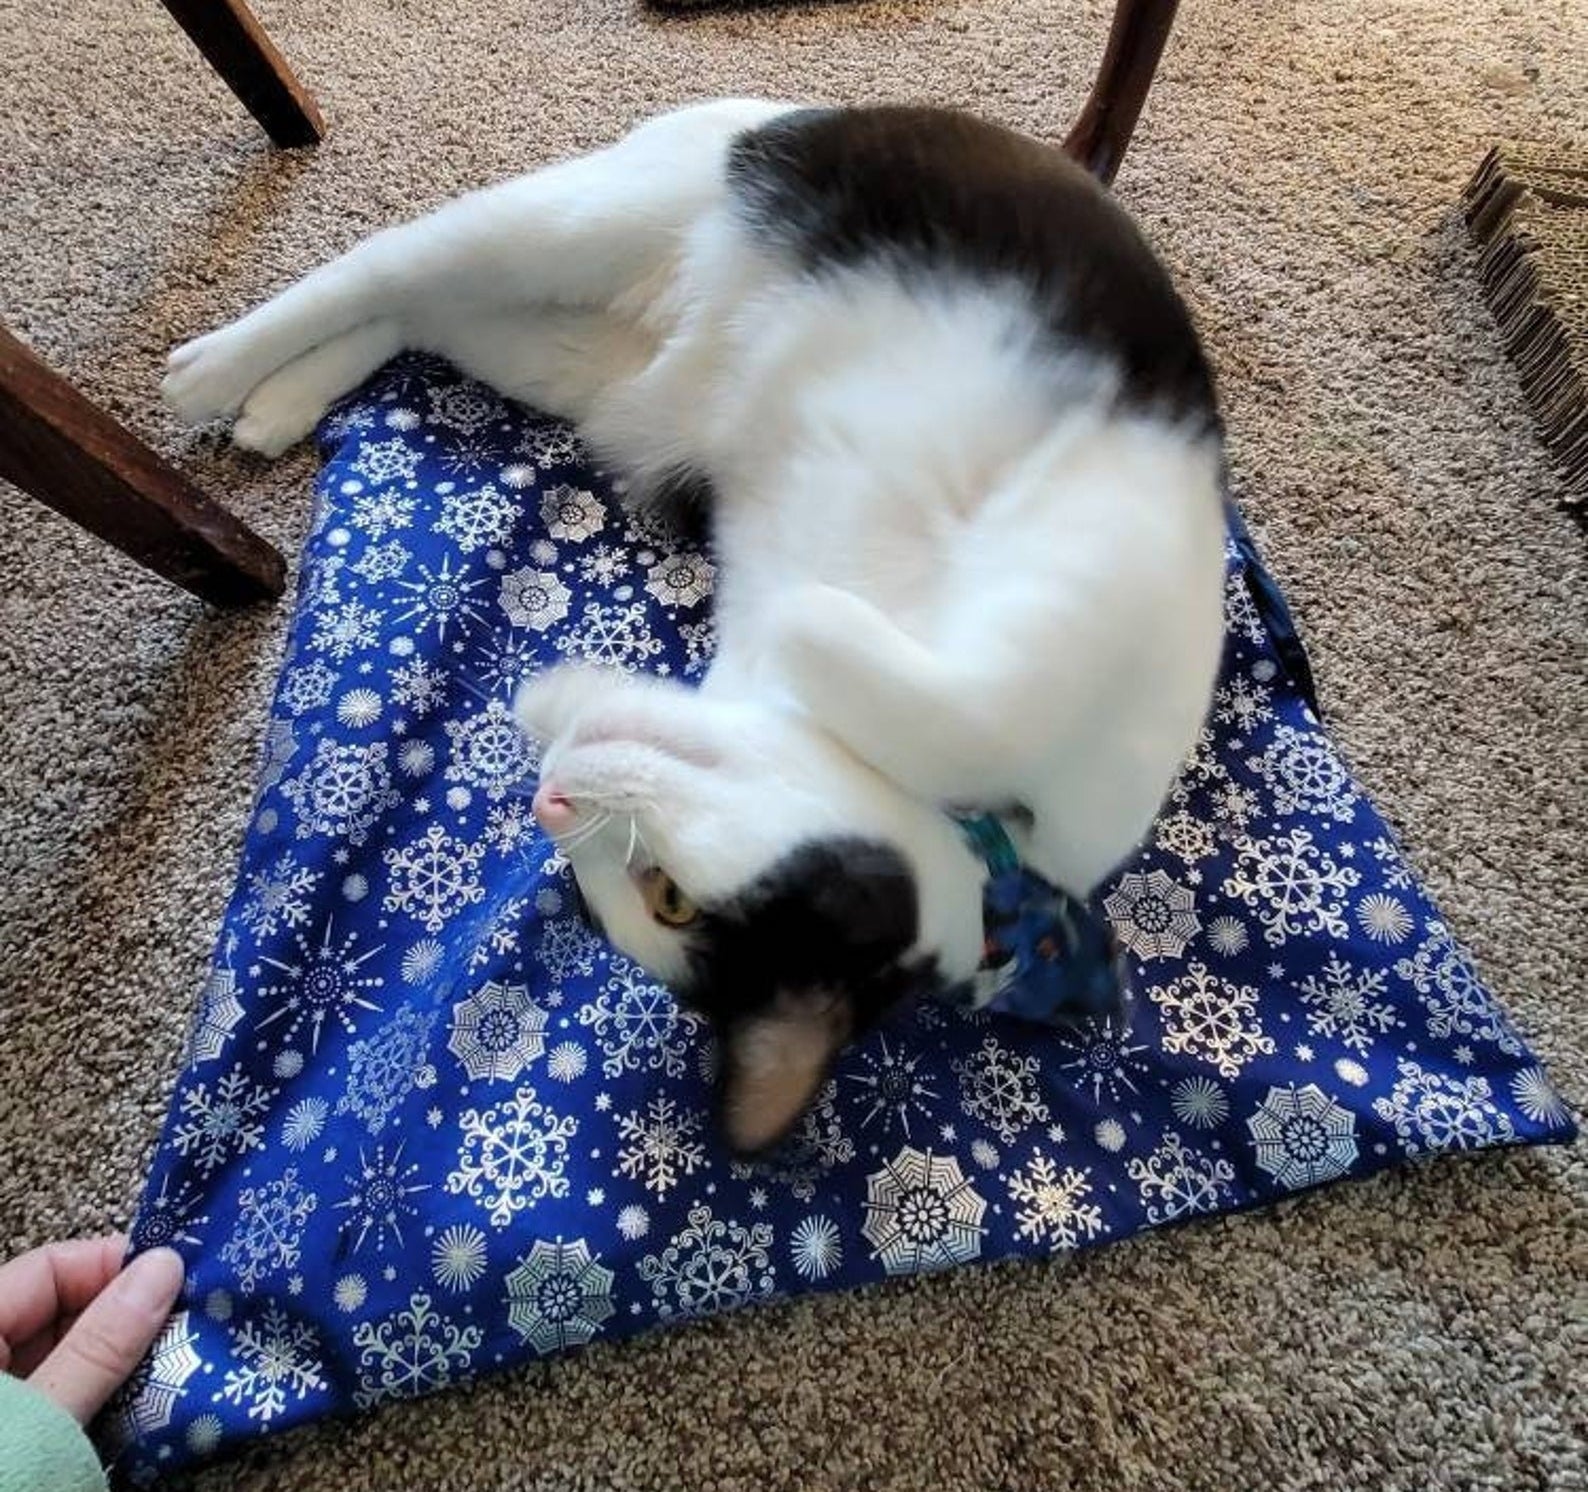 A cat on a blue and white snowflake mat